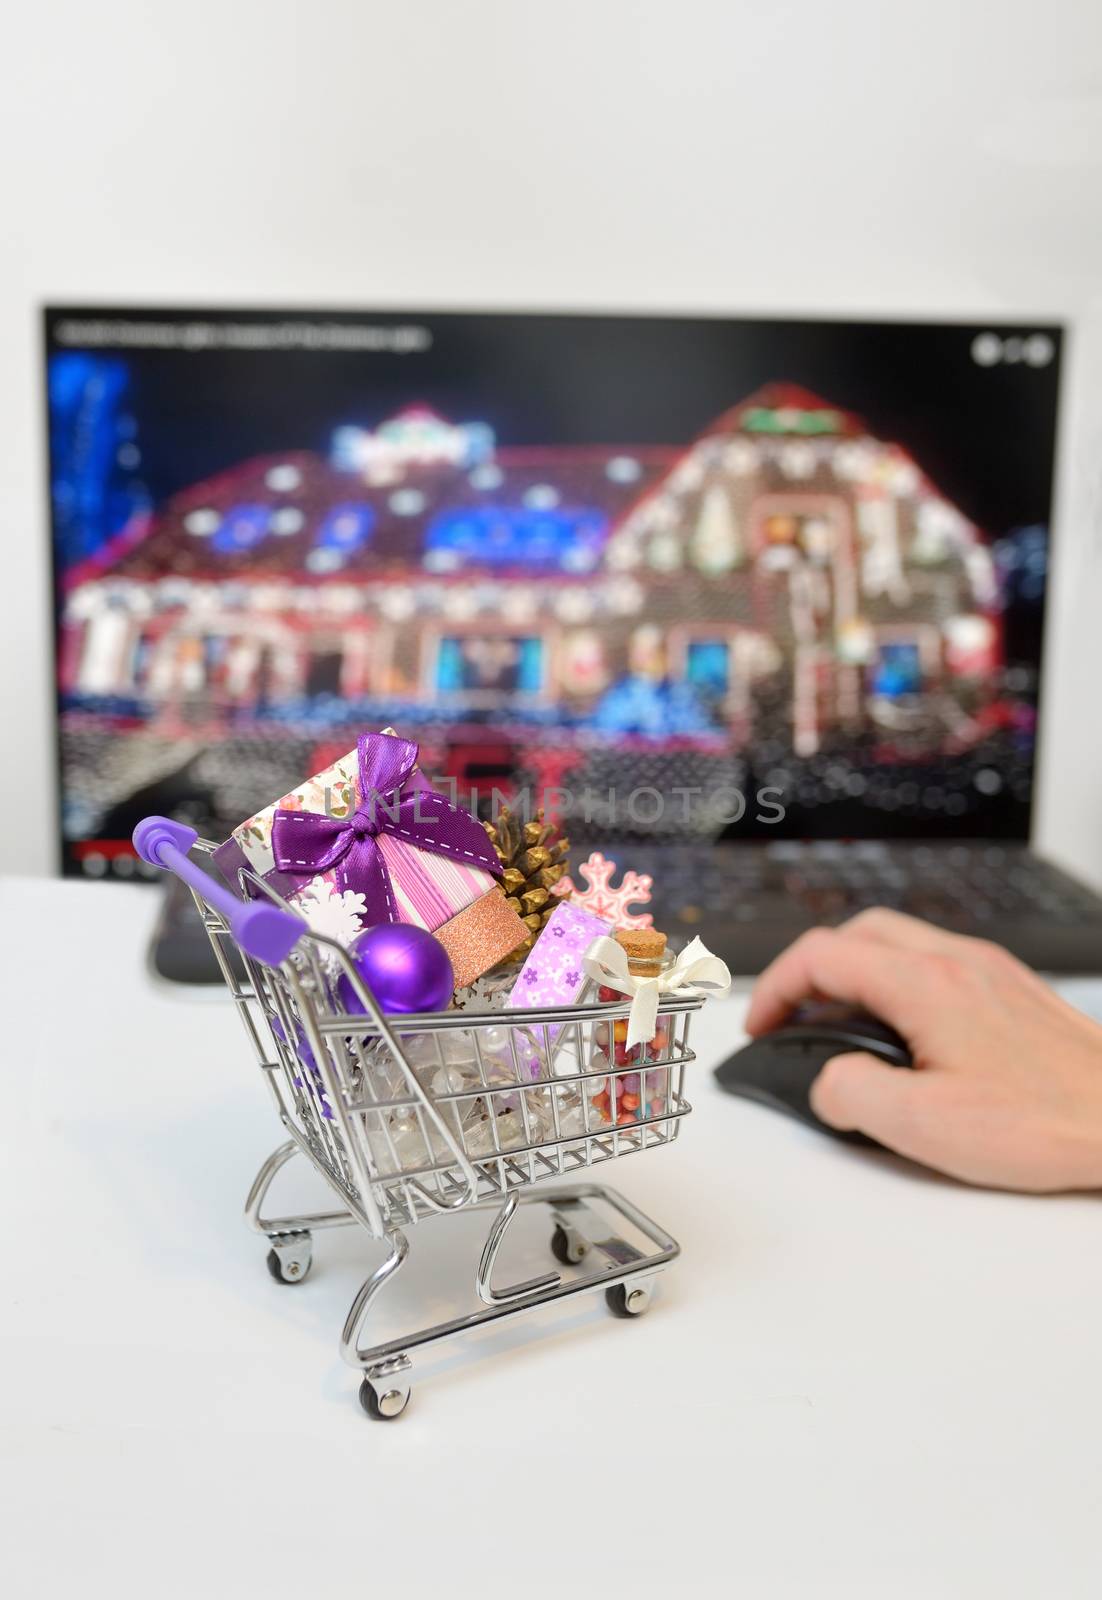 Online Shopping Cart on desk by mady70